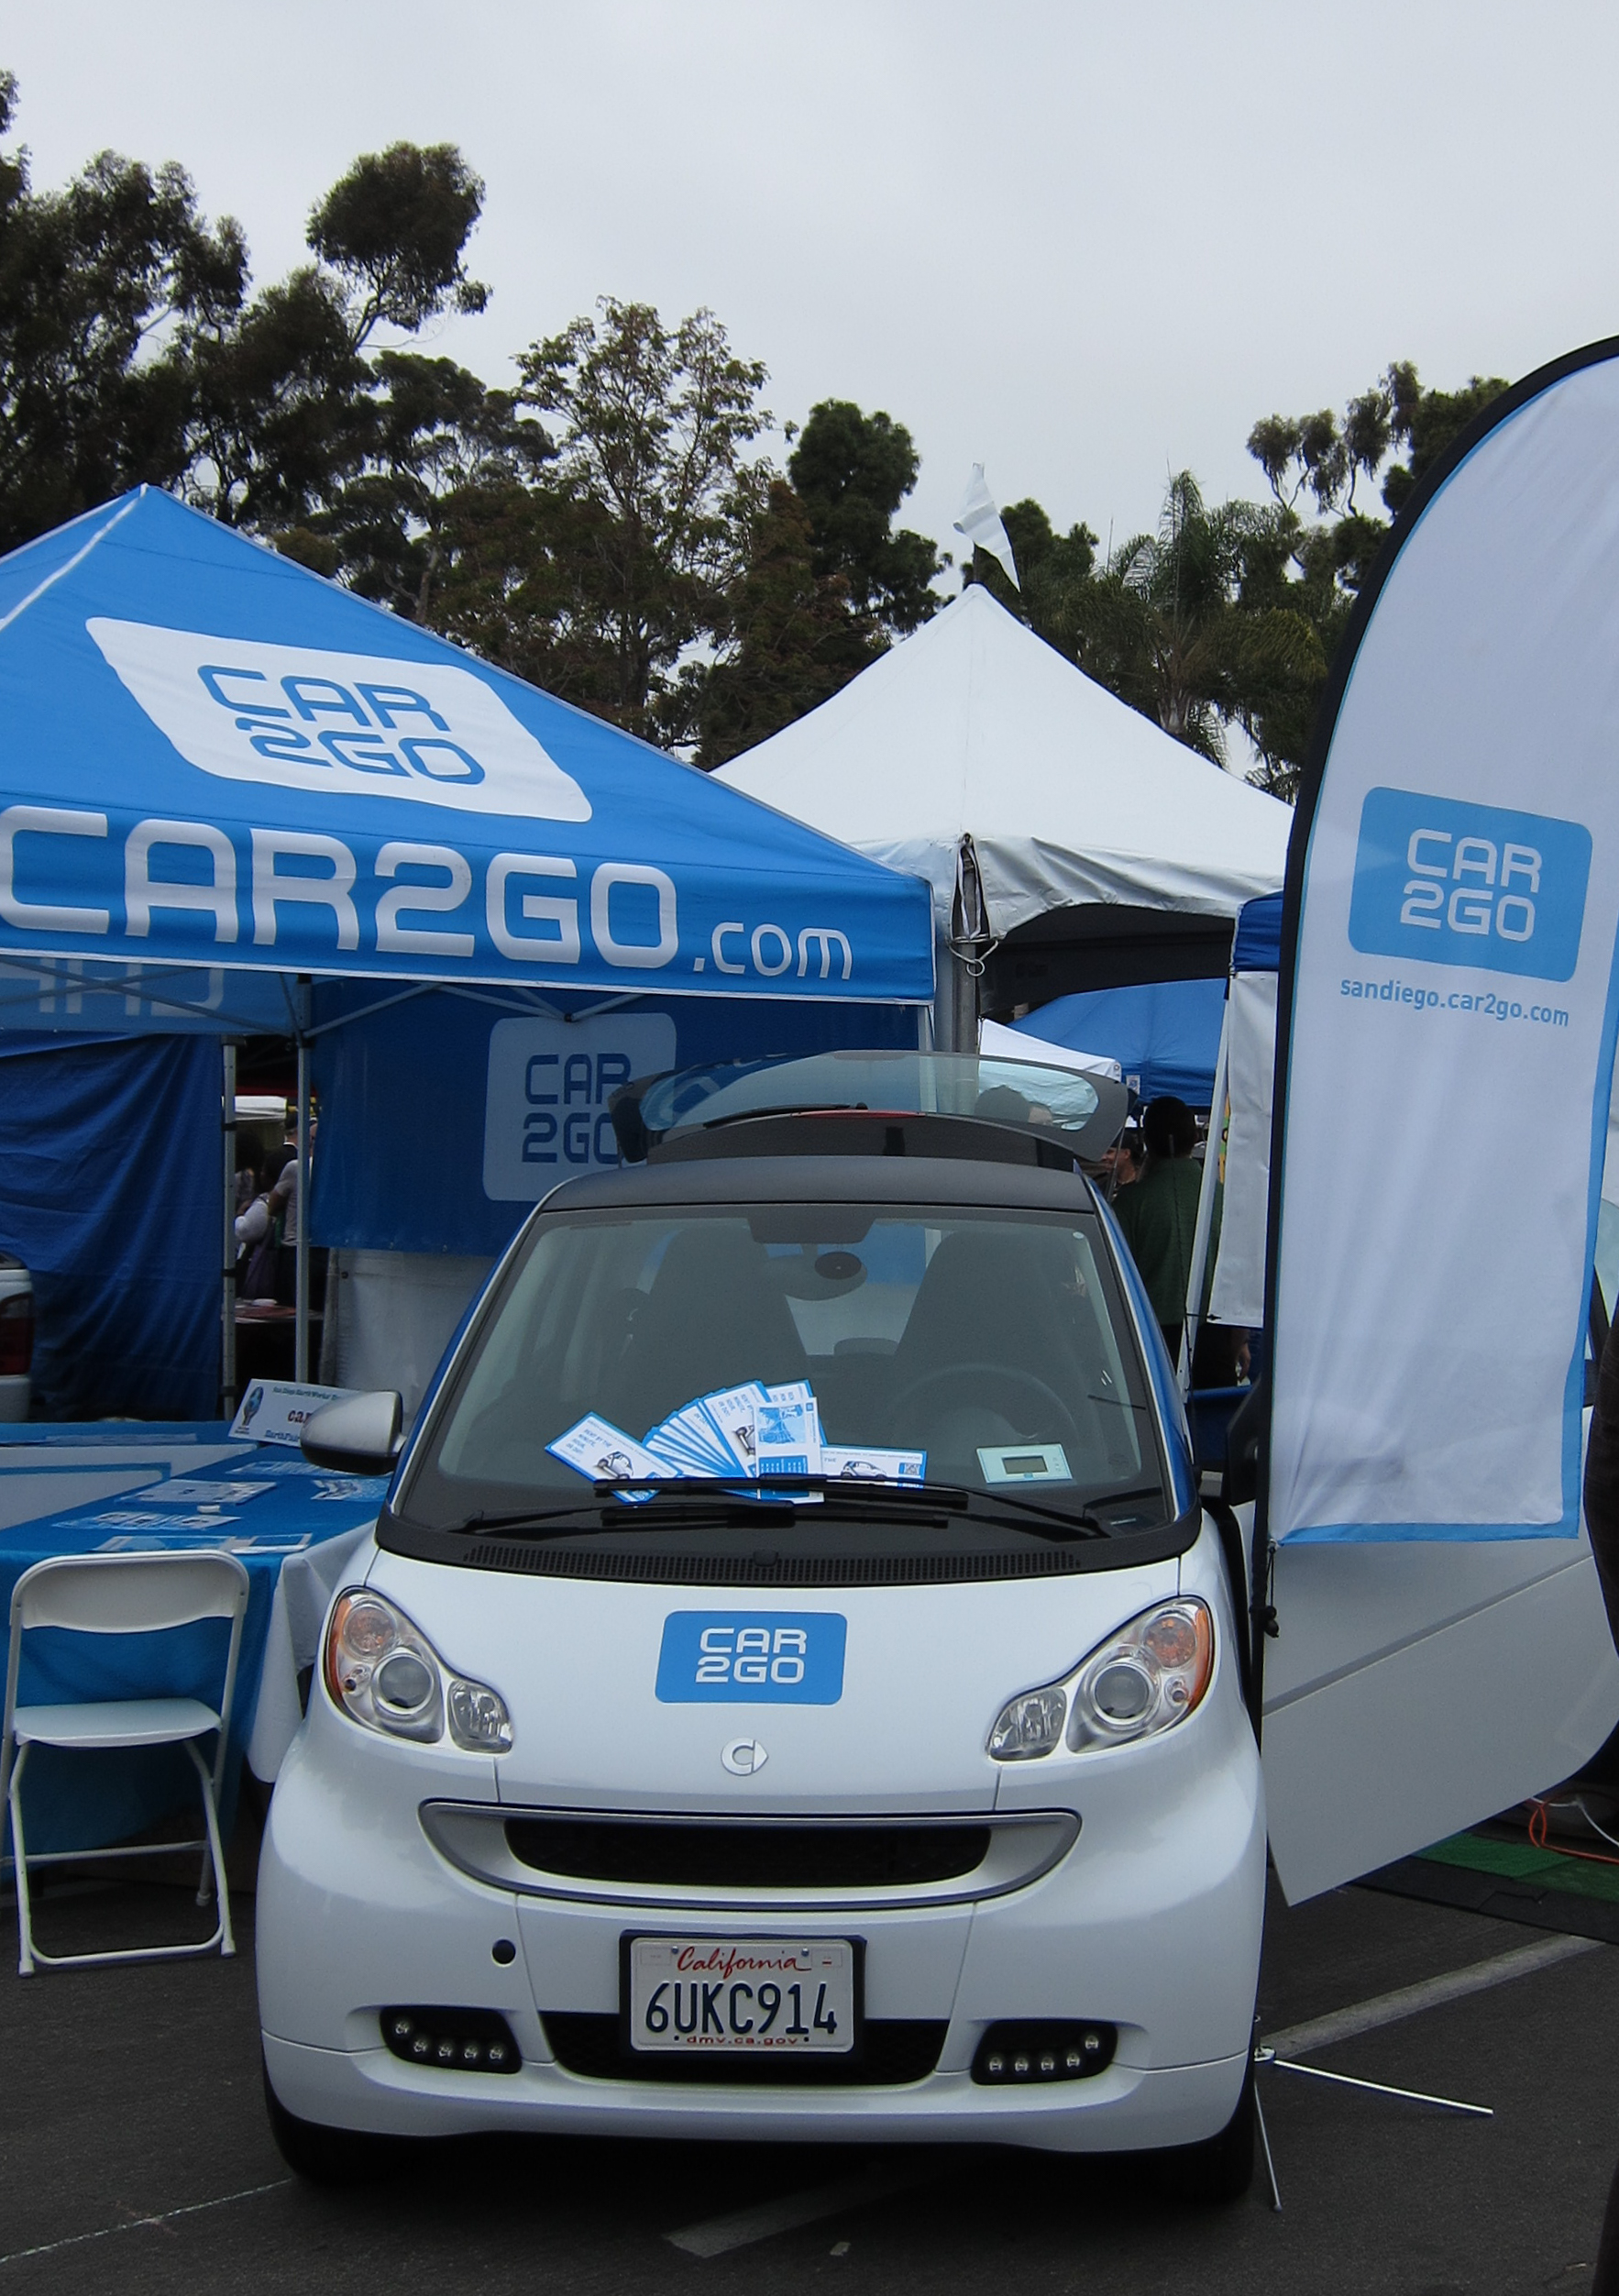 Accelerating in popularity among fairgoers is the Cleaner Car Concourse, an innovative line-up of electric, hybrid and alternative-fuel vehicles.